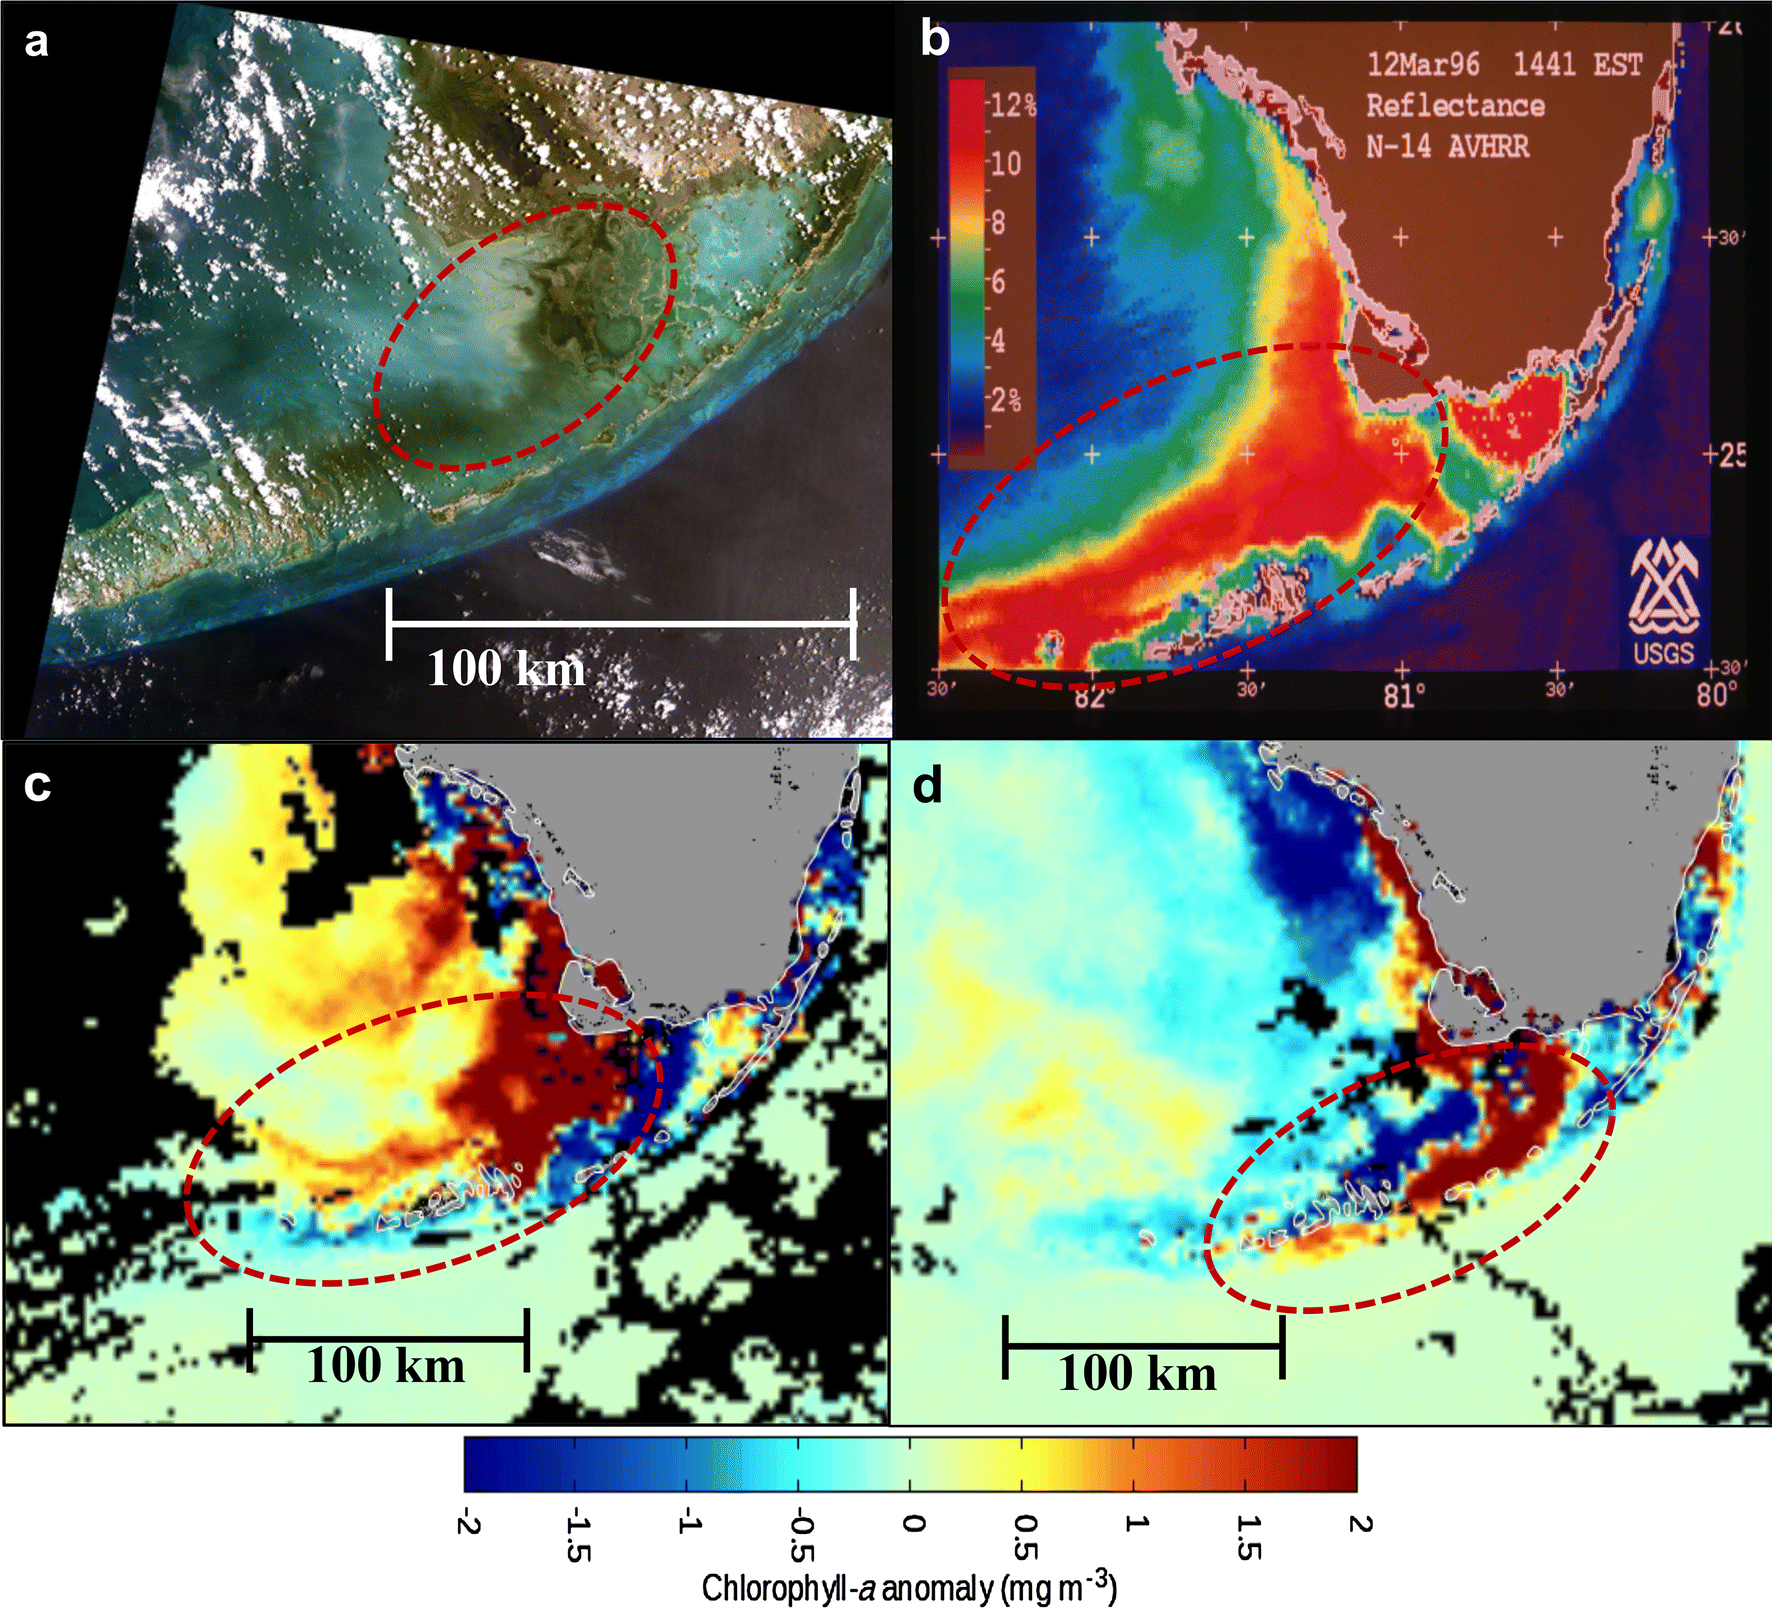 Remote sensing imagery of discolored water and algal blooms in the Florida Bay and the Florida Keys region between 1992 and 2013 showing connectivity of the mainland and the lower Florida Keys, all outlined in red. (a) Landsat true color image on 29 May 1992 shows turbid water in western Florida Bay and discolored, black water in central Florida Bay that extends southward to the lower Florida Keys; (b) AVHRR reflectance image on 12 March 1996 shows high turbidity from the Shark River Slough plume extending beyond the lower Florida Keys towards Dry Tortugas; (c, d) VIIRS chlorophyll a anomaly images show phytoplankton blooms off Shark River Slough reaching the lower Florida Keys that were partially composed of the cyanobacterium, Synechococcus, on (c) 24 November 2013 and (d) 27 January 2014. Graphic: Lapointe, et al., 2019 / Marine Biology